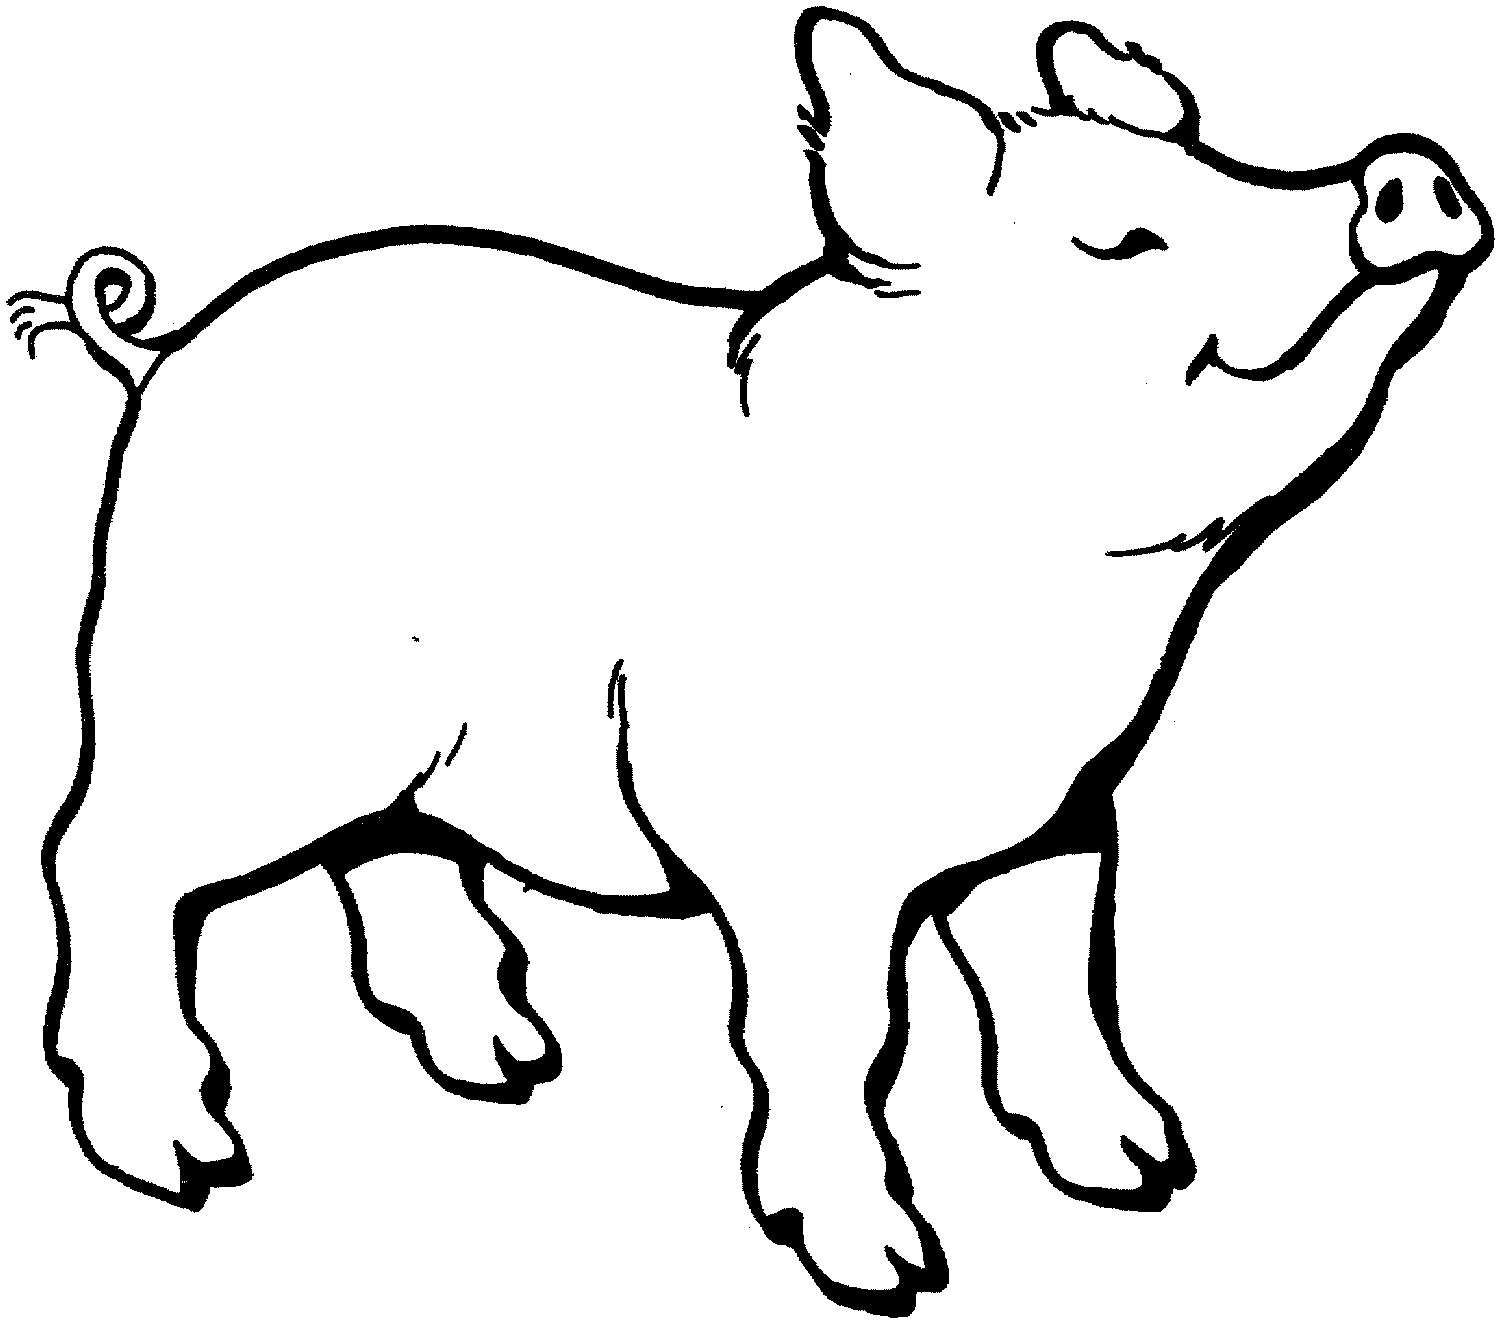 Printable Pig Face Coloring Page - Printable Coloring Pages - ClipArt Best  - ClipArt Best